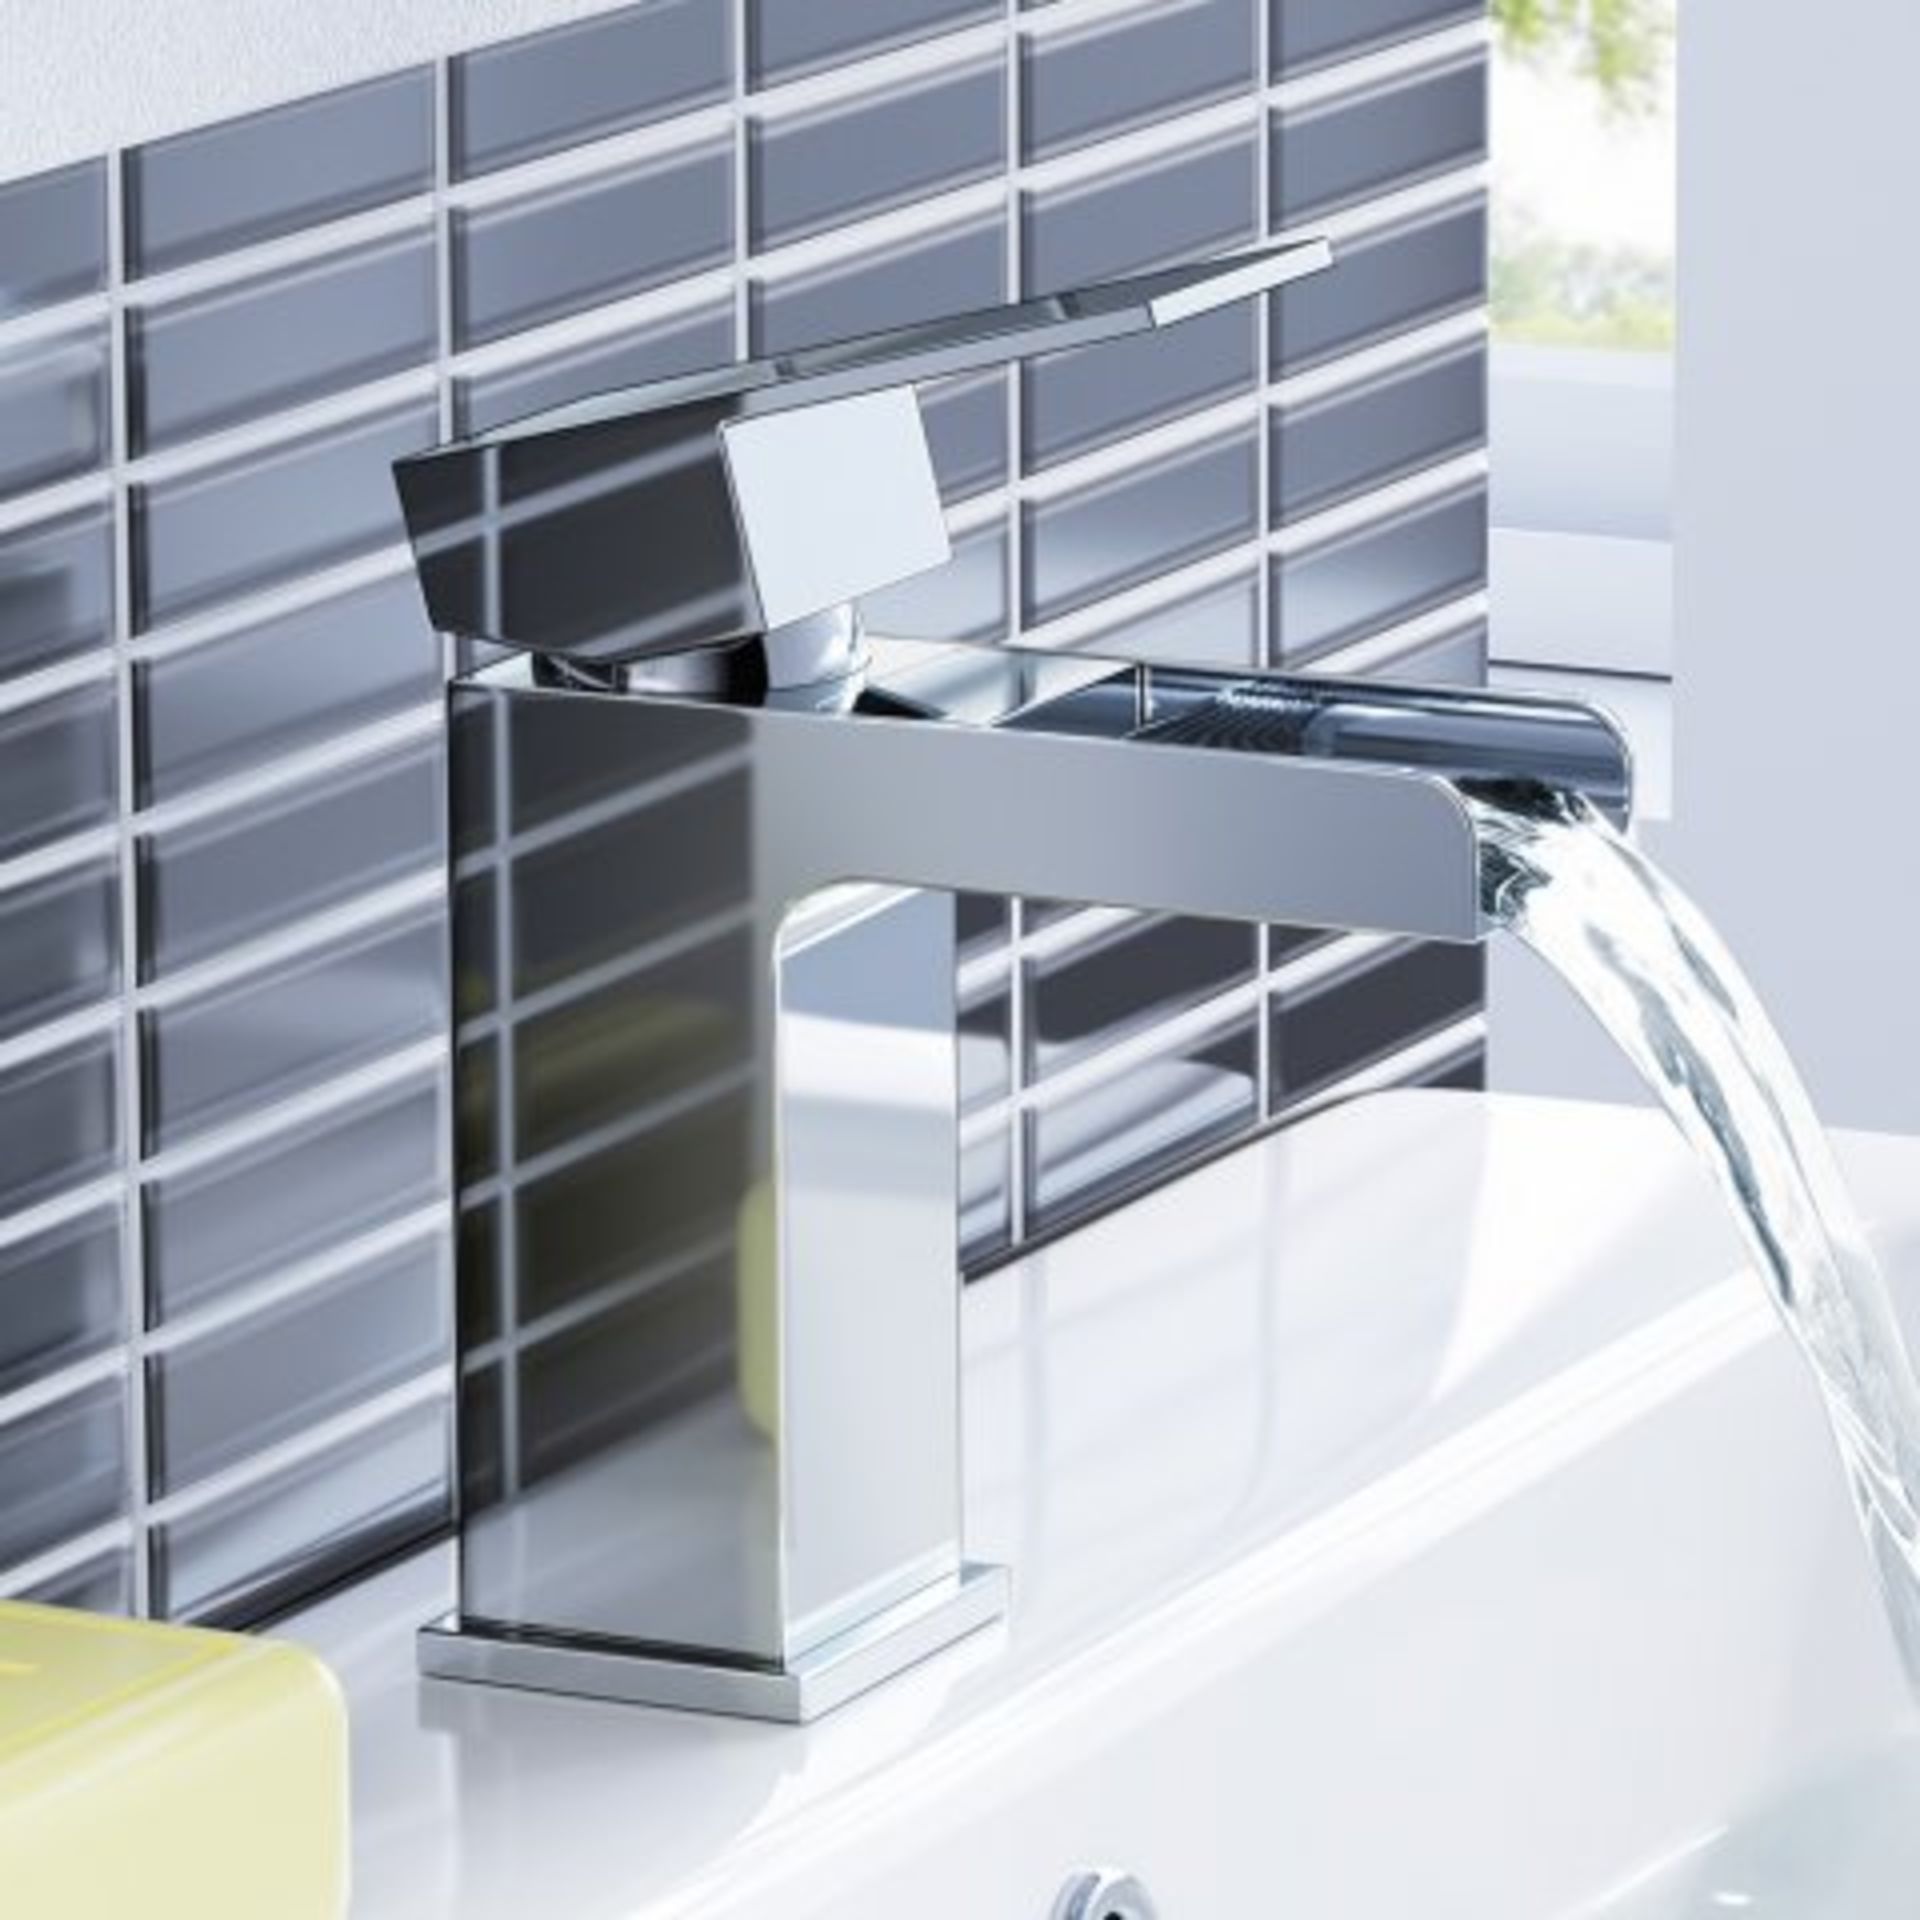 (I64) Niagra II Basin Mixer Tap Waterfall Feature Our range of waterfall taps add a contemporary